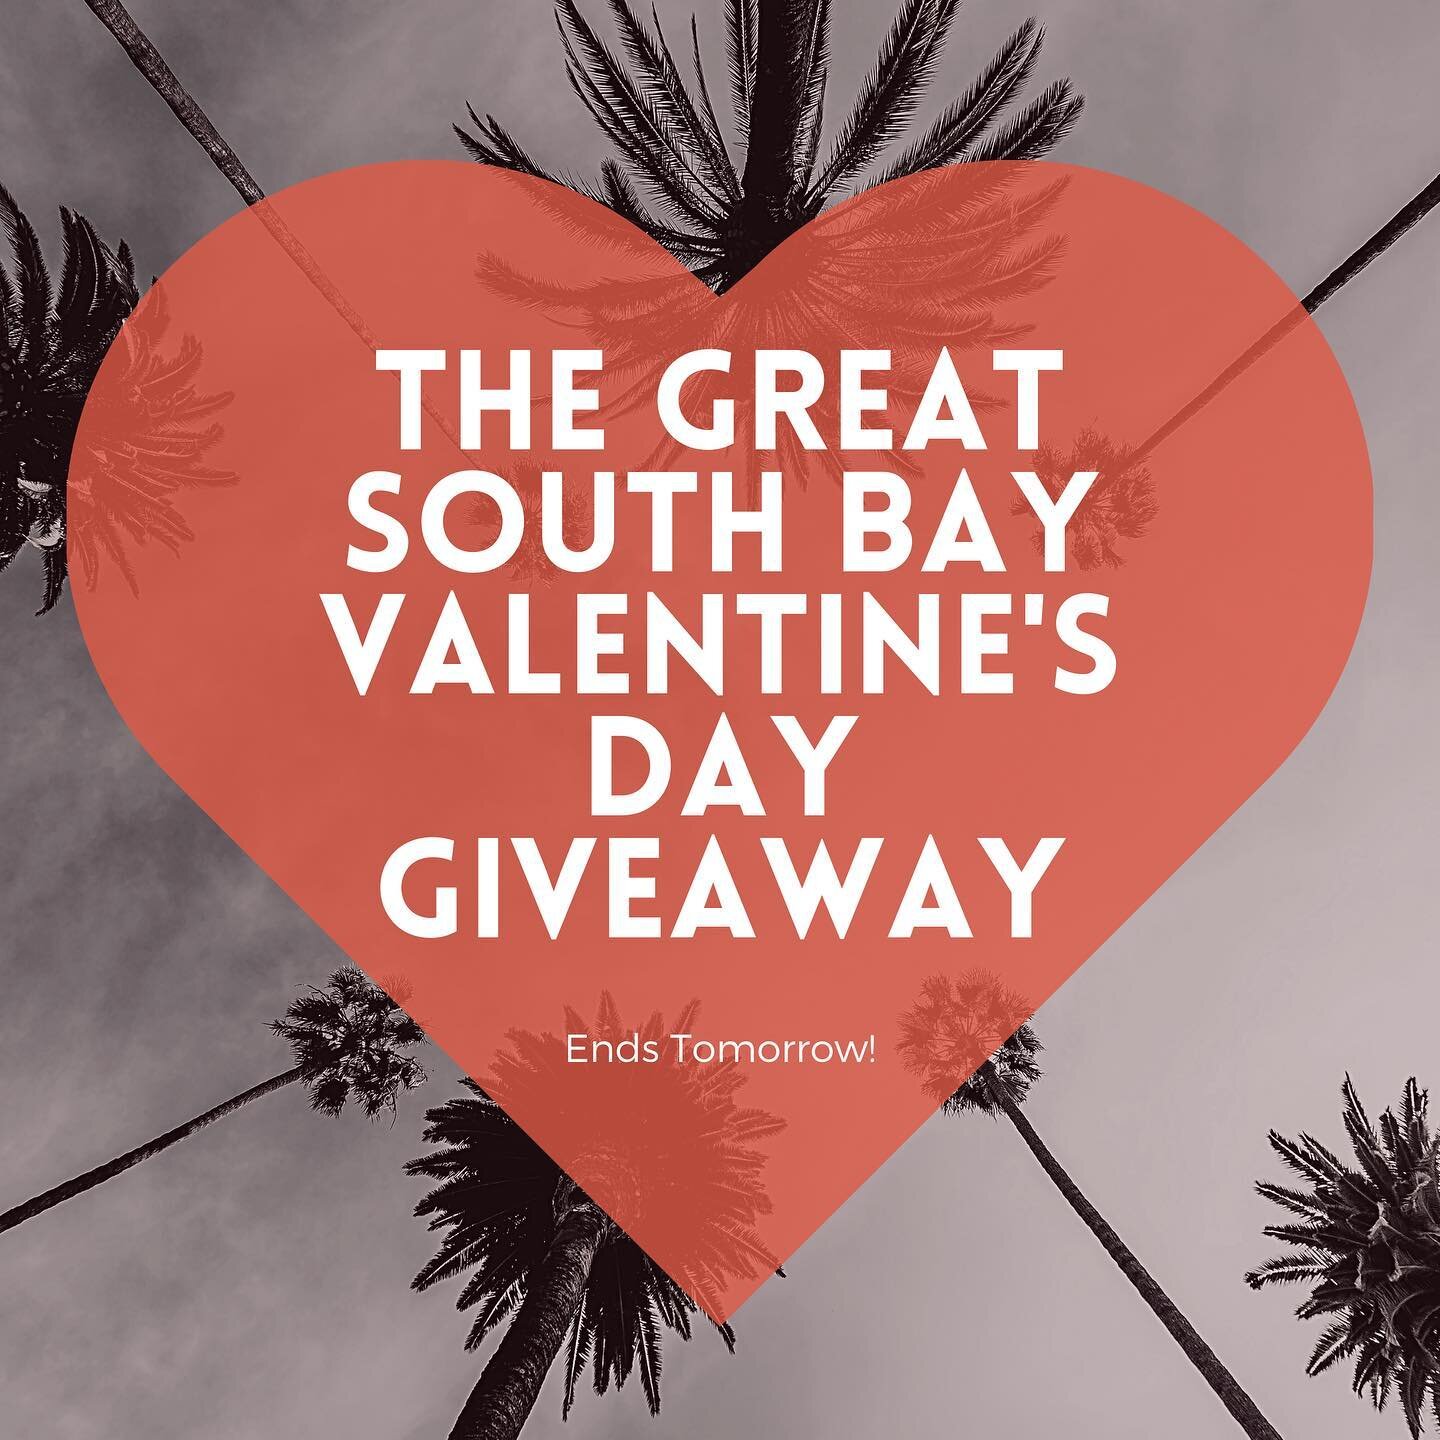 The Great South Bay Valentine&rsquo;s Day Giveaway is going on now through tomorrow at 9 pm! There are over $1300 in gifts from local South Bay businesses. View Monday&rsquo;s post for all the details on how to enter.

#southbay #giveaway #rivieravil